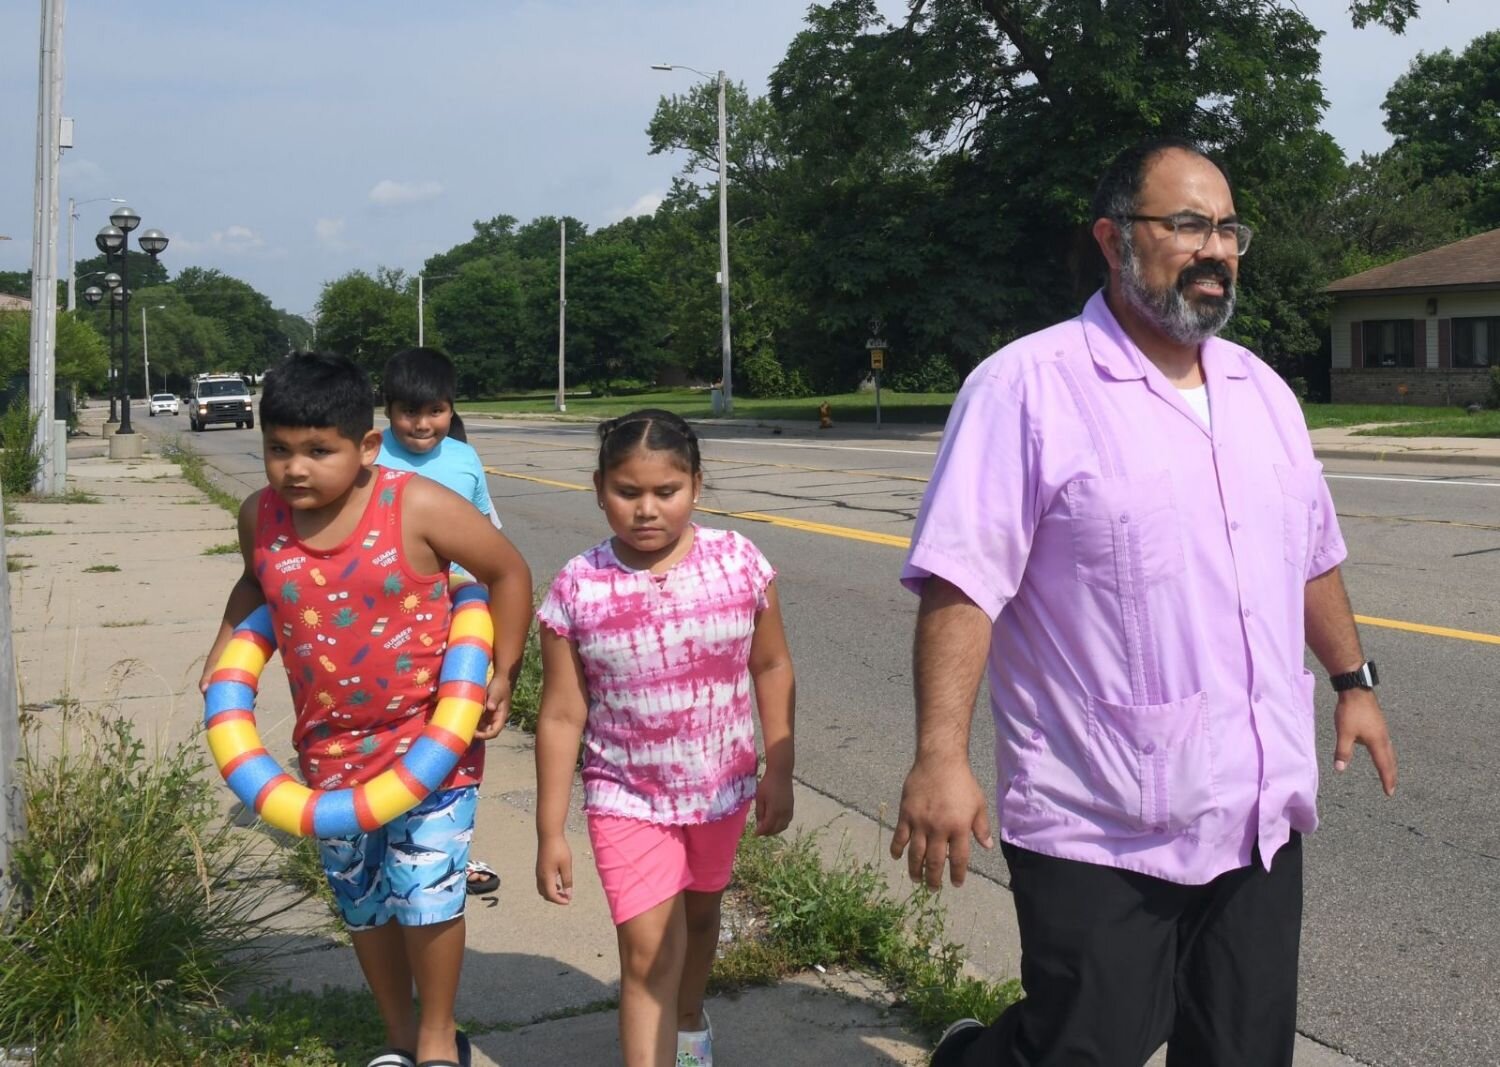 Jose Orozco, executive director of VOCES, walks with a group of children toward a bus stop. The children were going to learn to ride a Battle Creek city bus on their way to Full Blast.